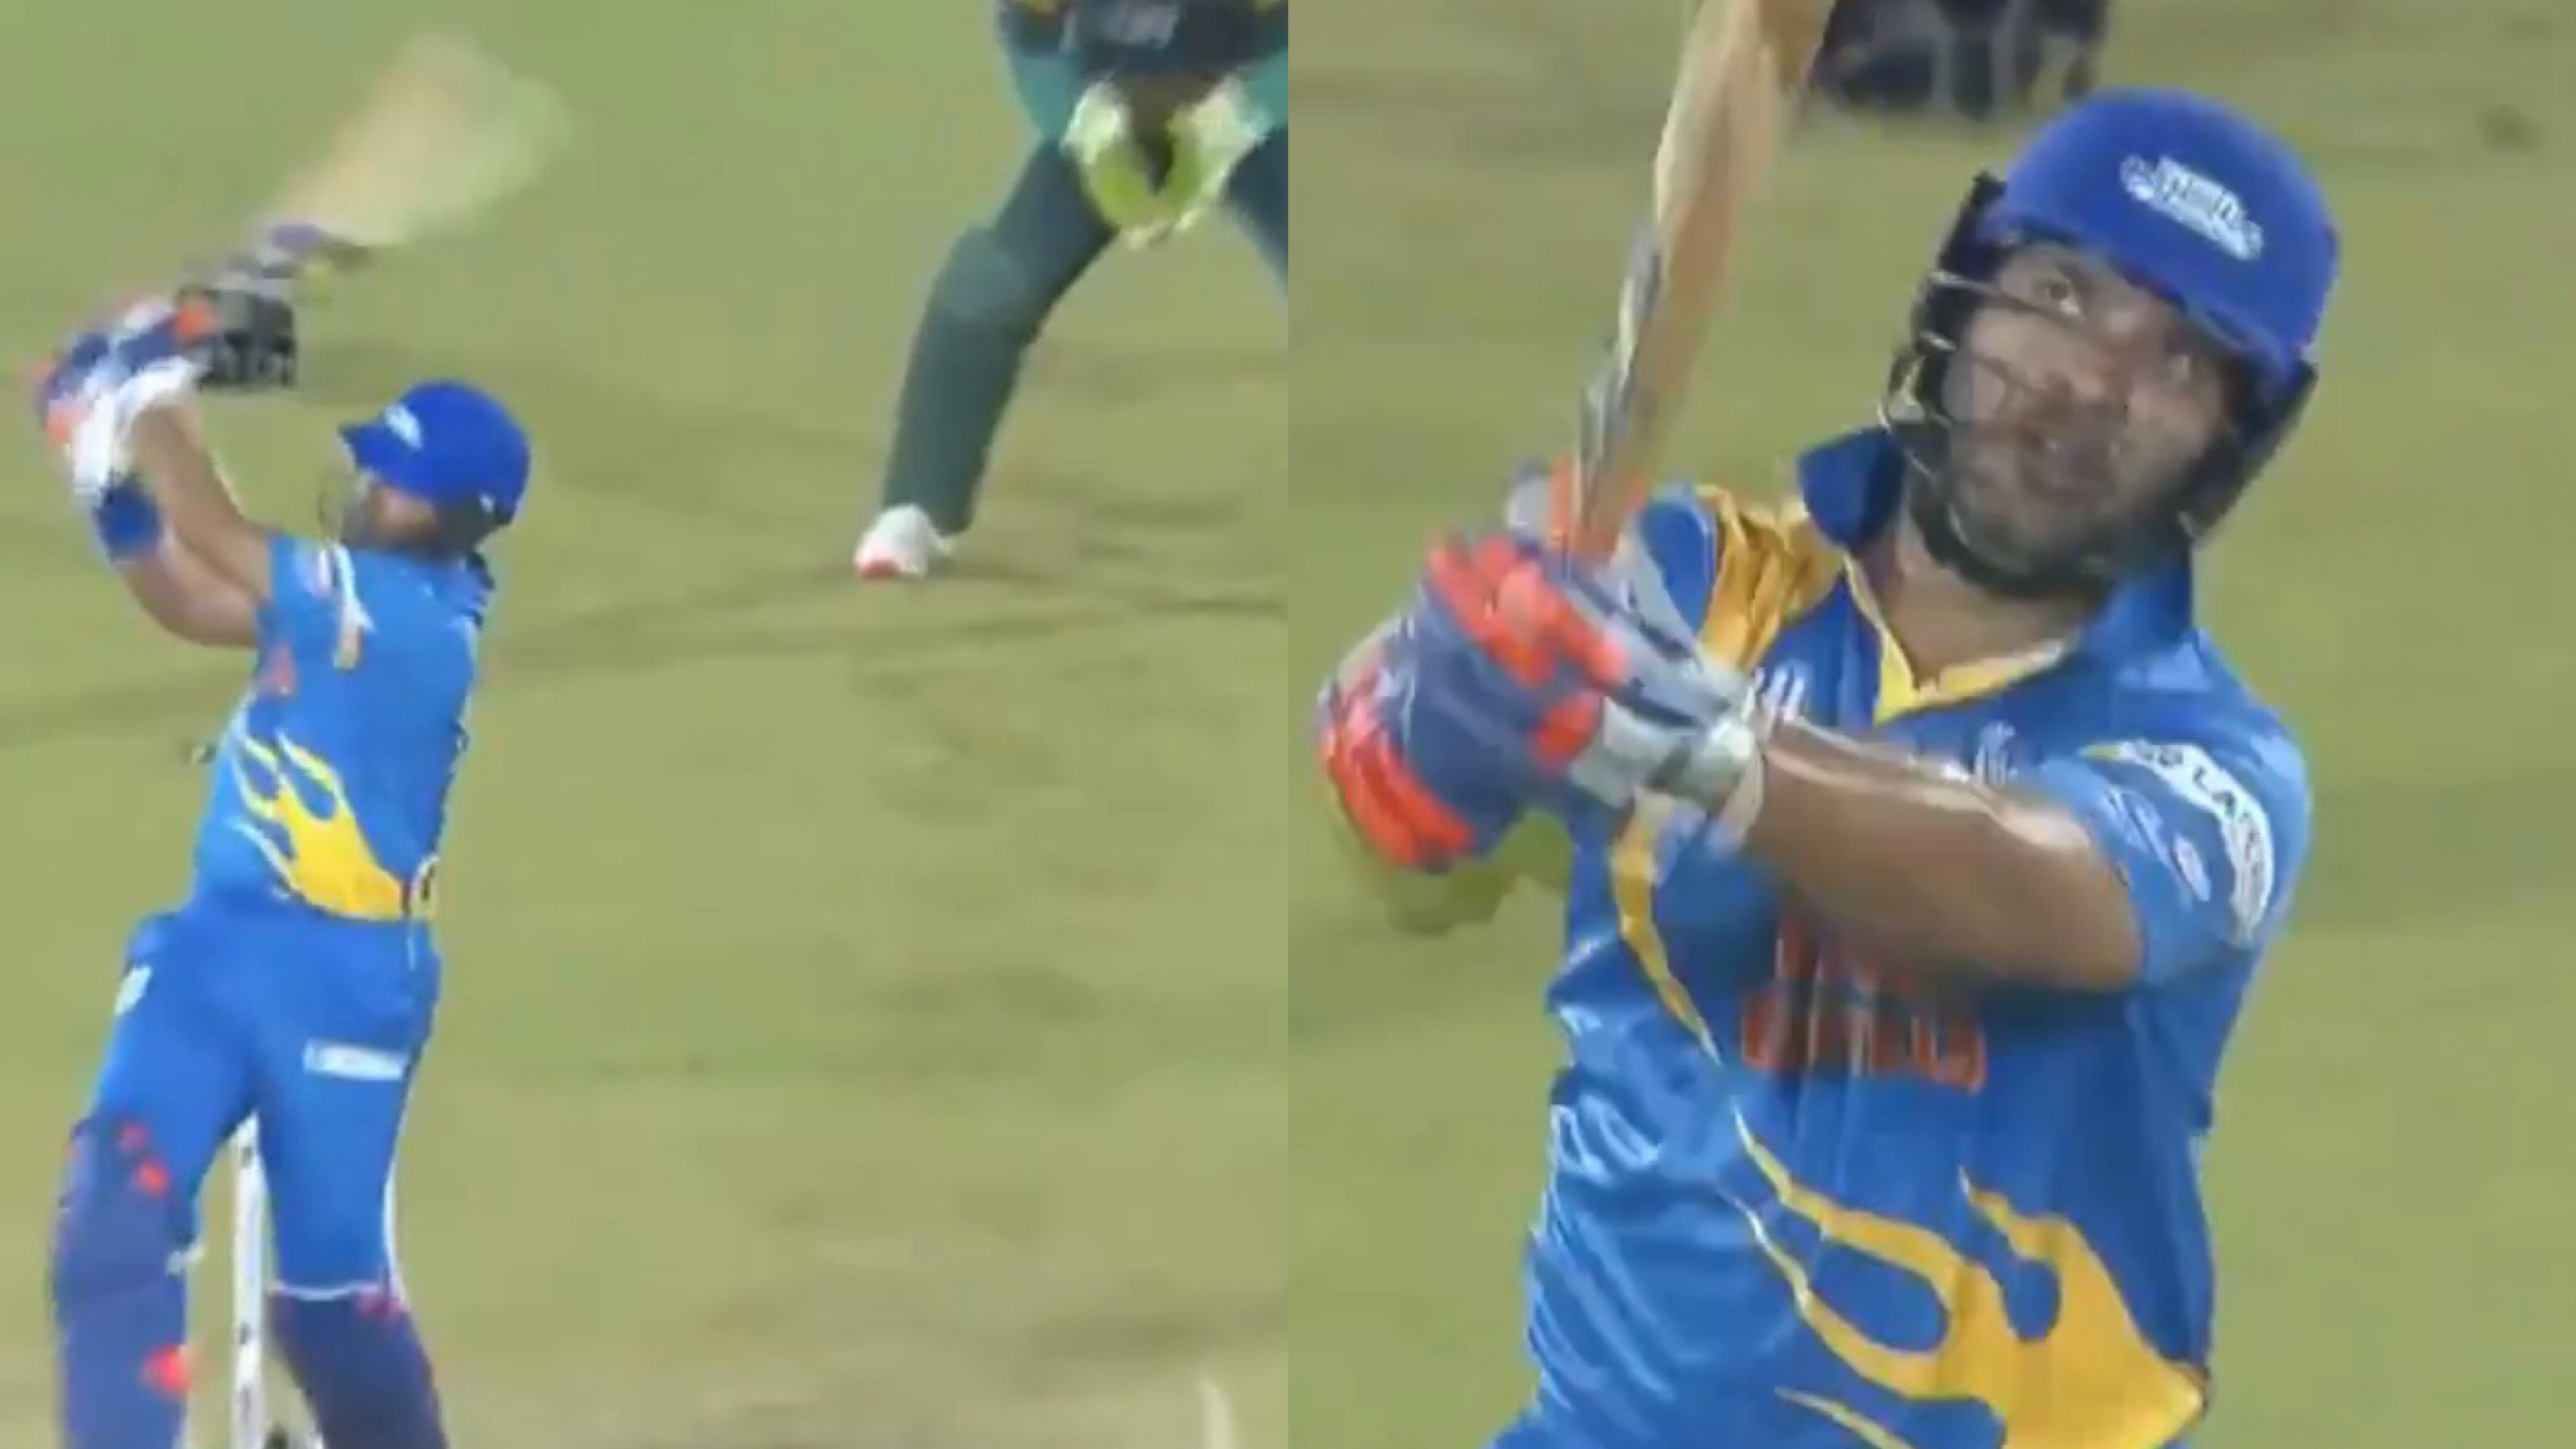 RSWS 2021: WATCH - Yuvraj Singh turns back the clock with 4 consecutive sixes off Zander de Bruyn